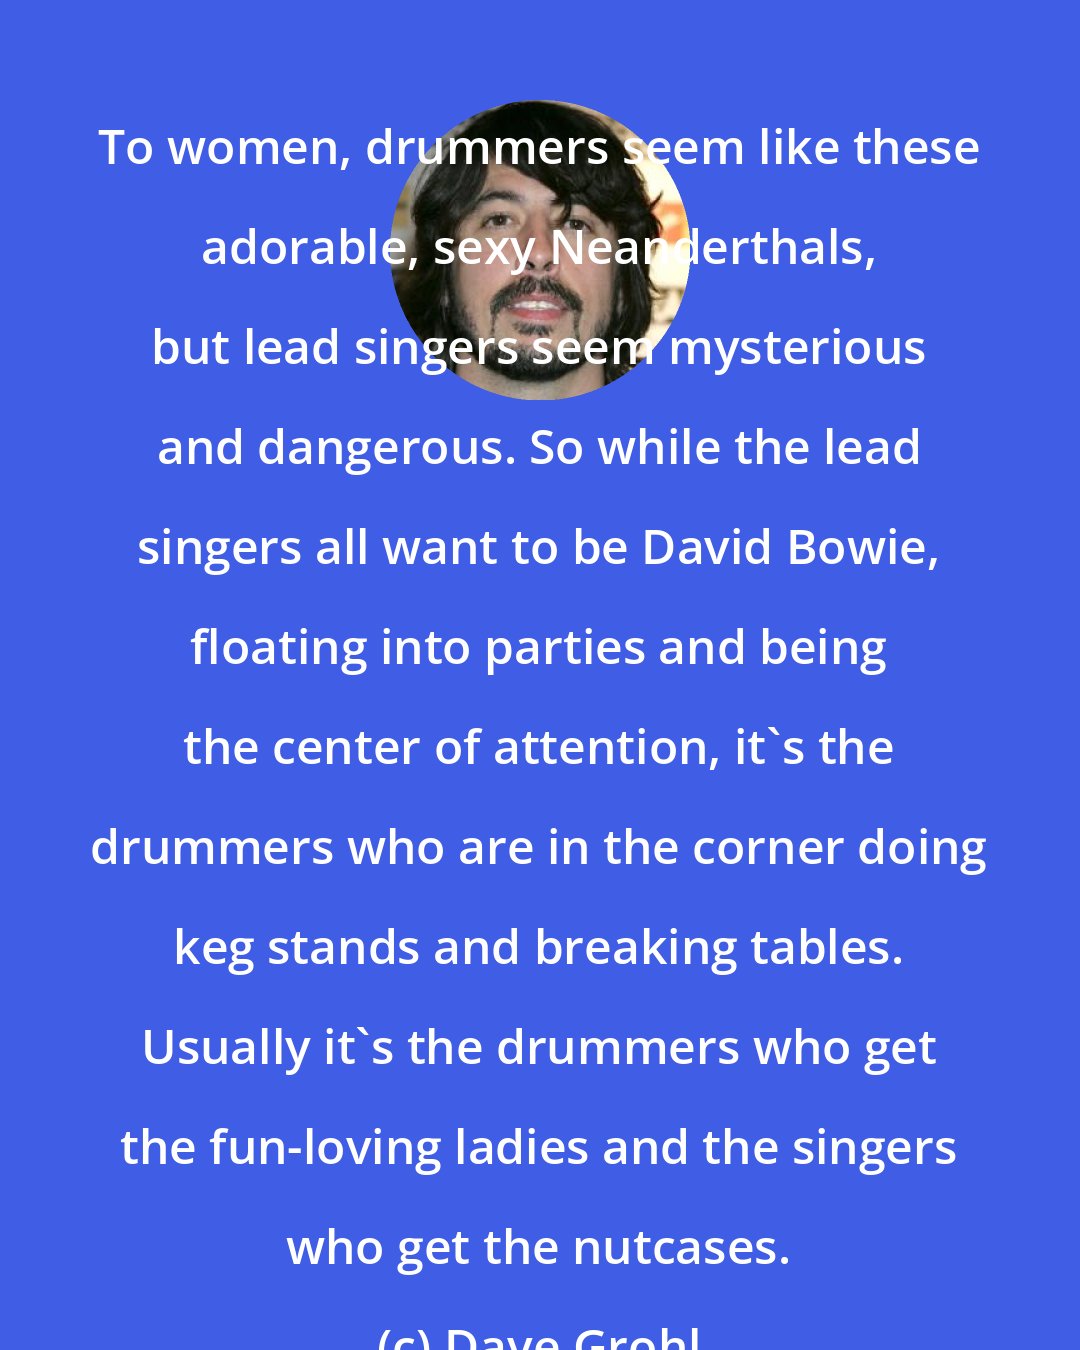 Dave Grohl: To women, drummers seem like these adorable, sexy Neanderthals, but lead singers seem mysterious and dangerous. So while the lead singers all want to be David Bowie, floating into parties and being the center of attention, it's the drummers who are in the corner doing keg stands and breaking tables. Usually it's the drummers who get the fun-loving ladies and the singers who get the nutcases.